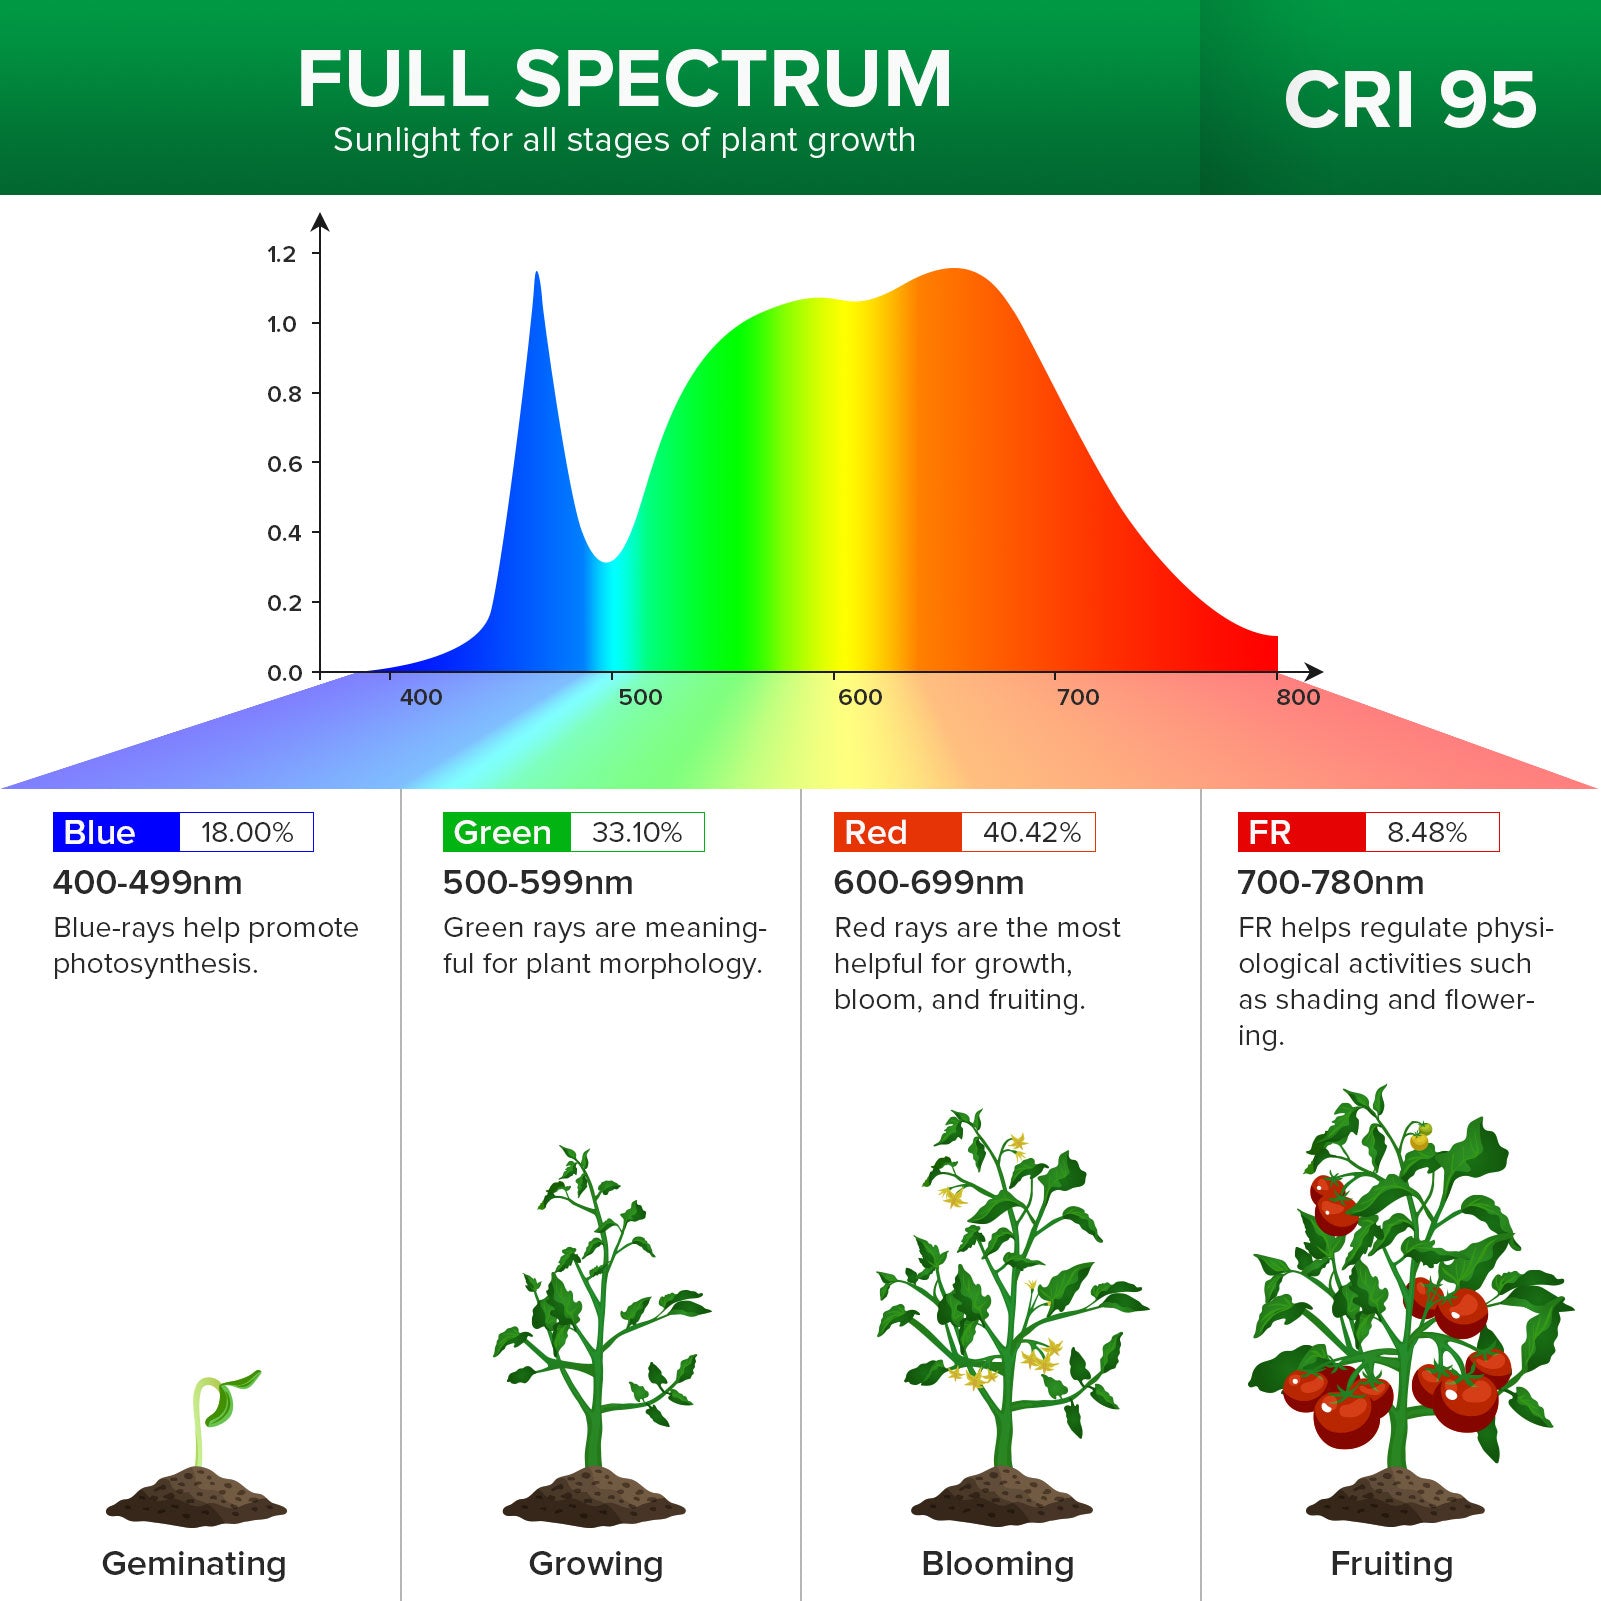 30W Adjustable 3-Head Clip-on LED Grow Light (US CA ONLY) is full spectrum，sunlight for all stages of plant growth，CRI 95.